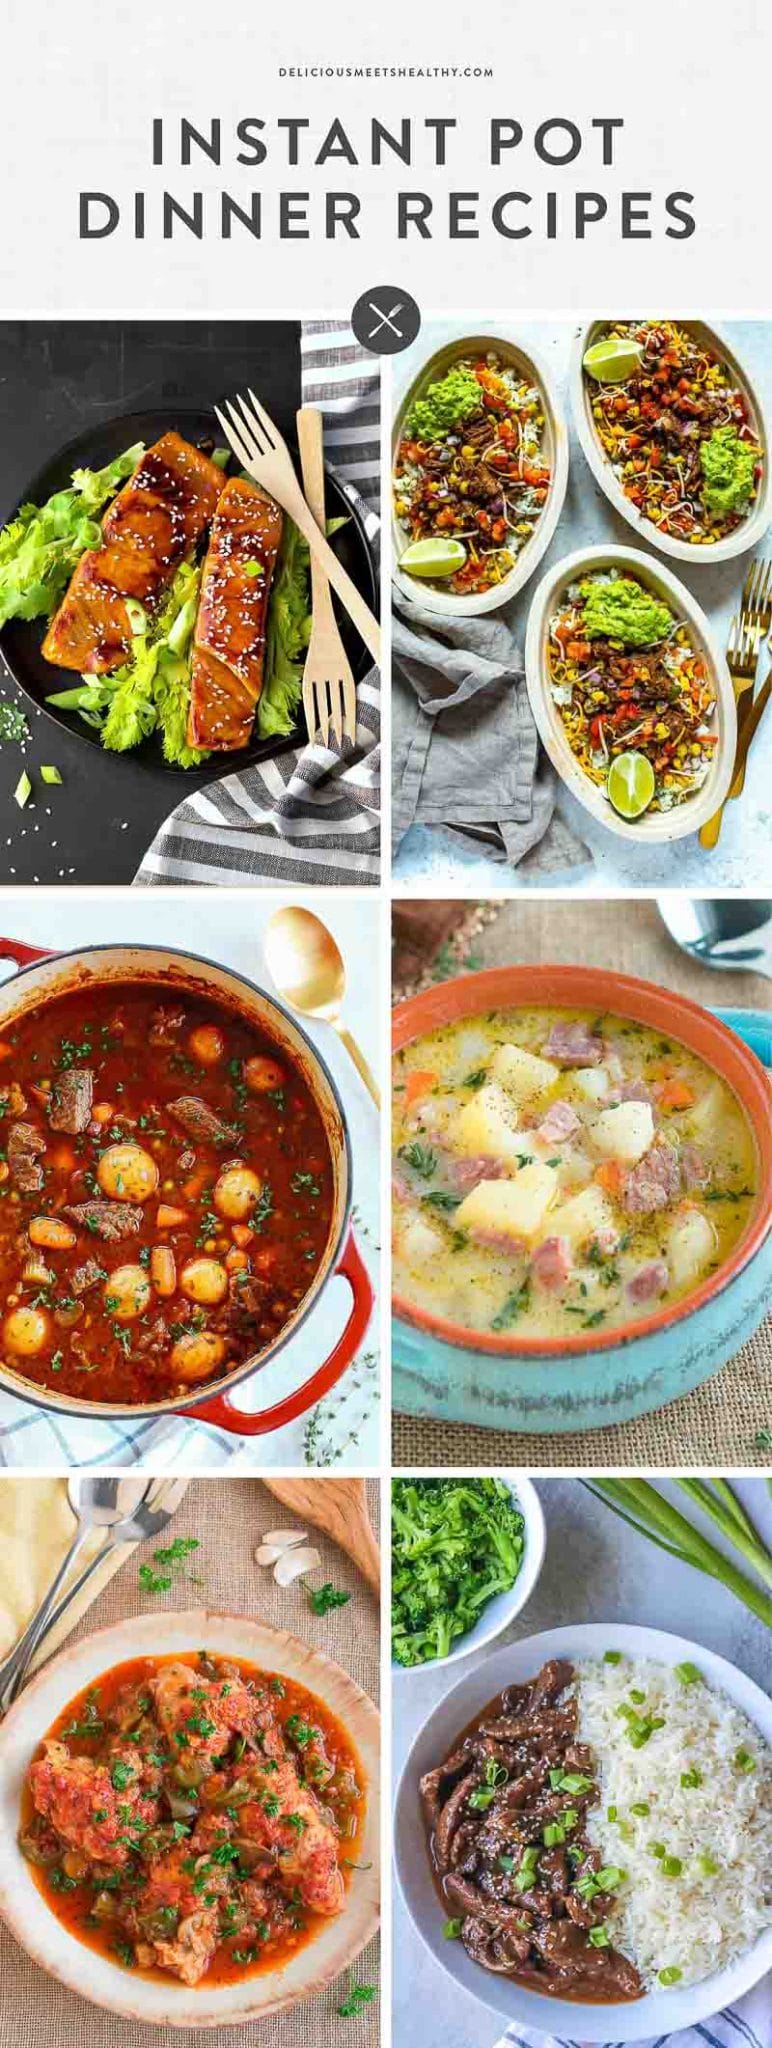 Instant Pot Dinner recipes - roundup collage